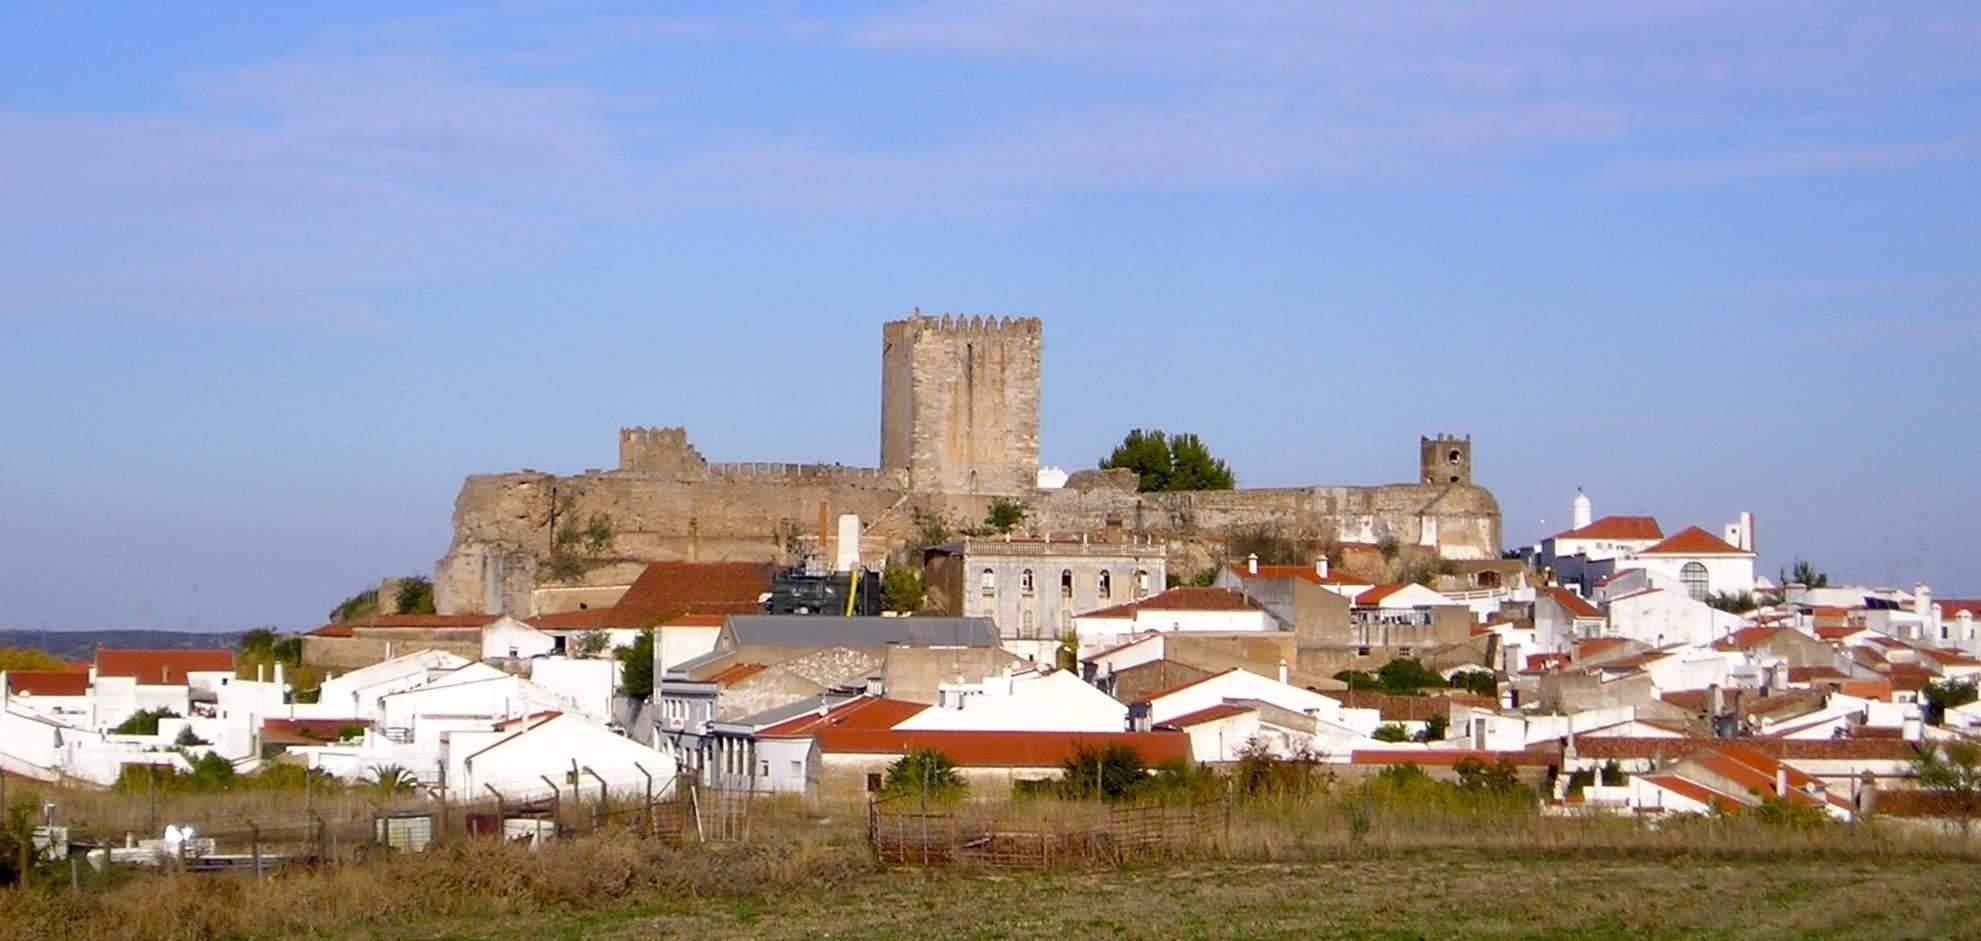 View of the Town